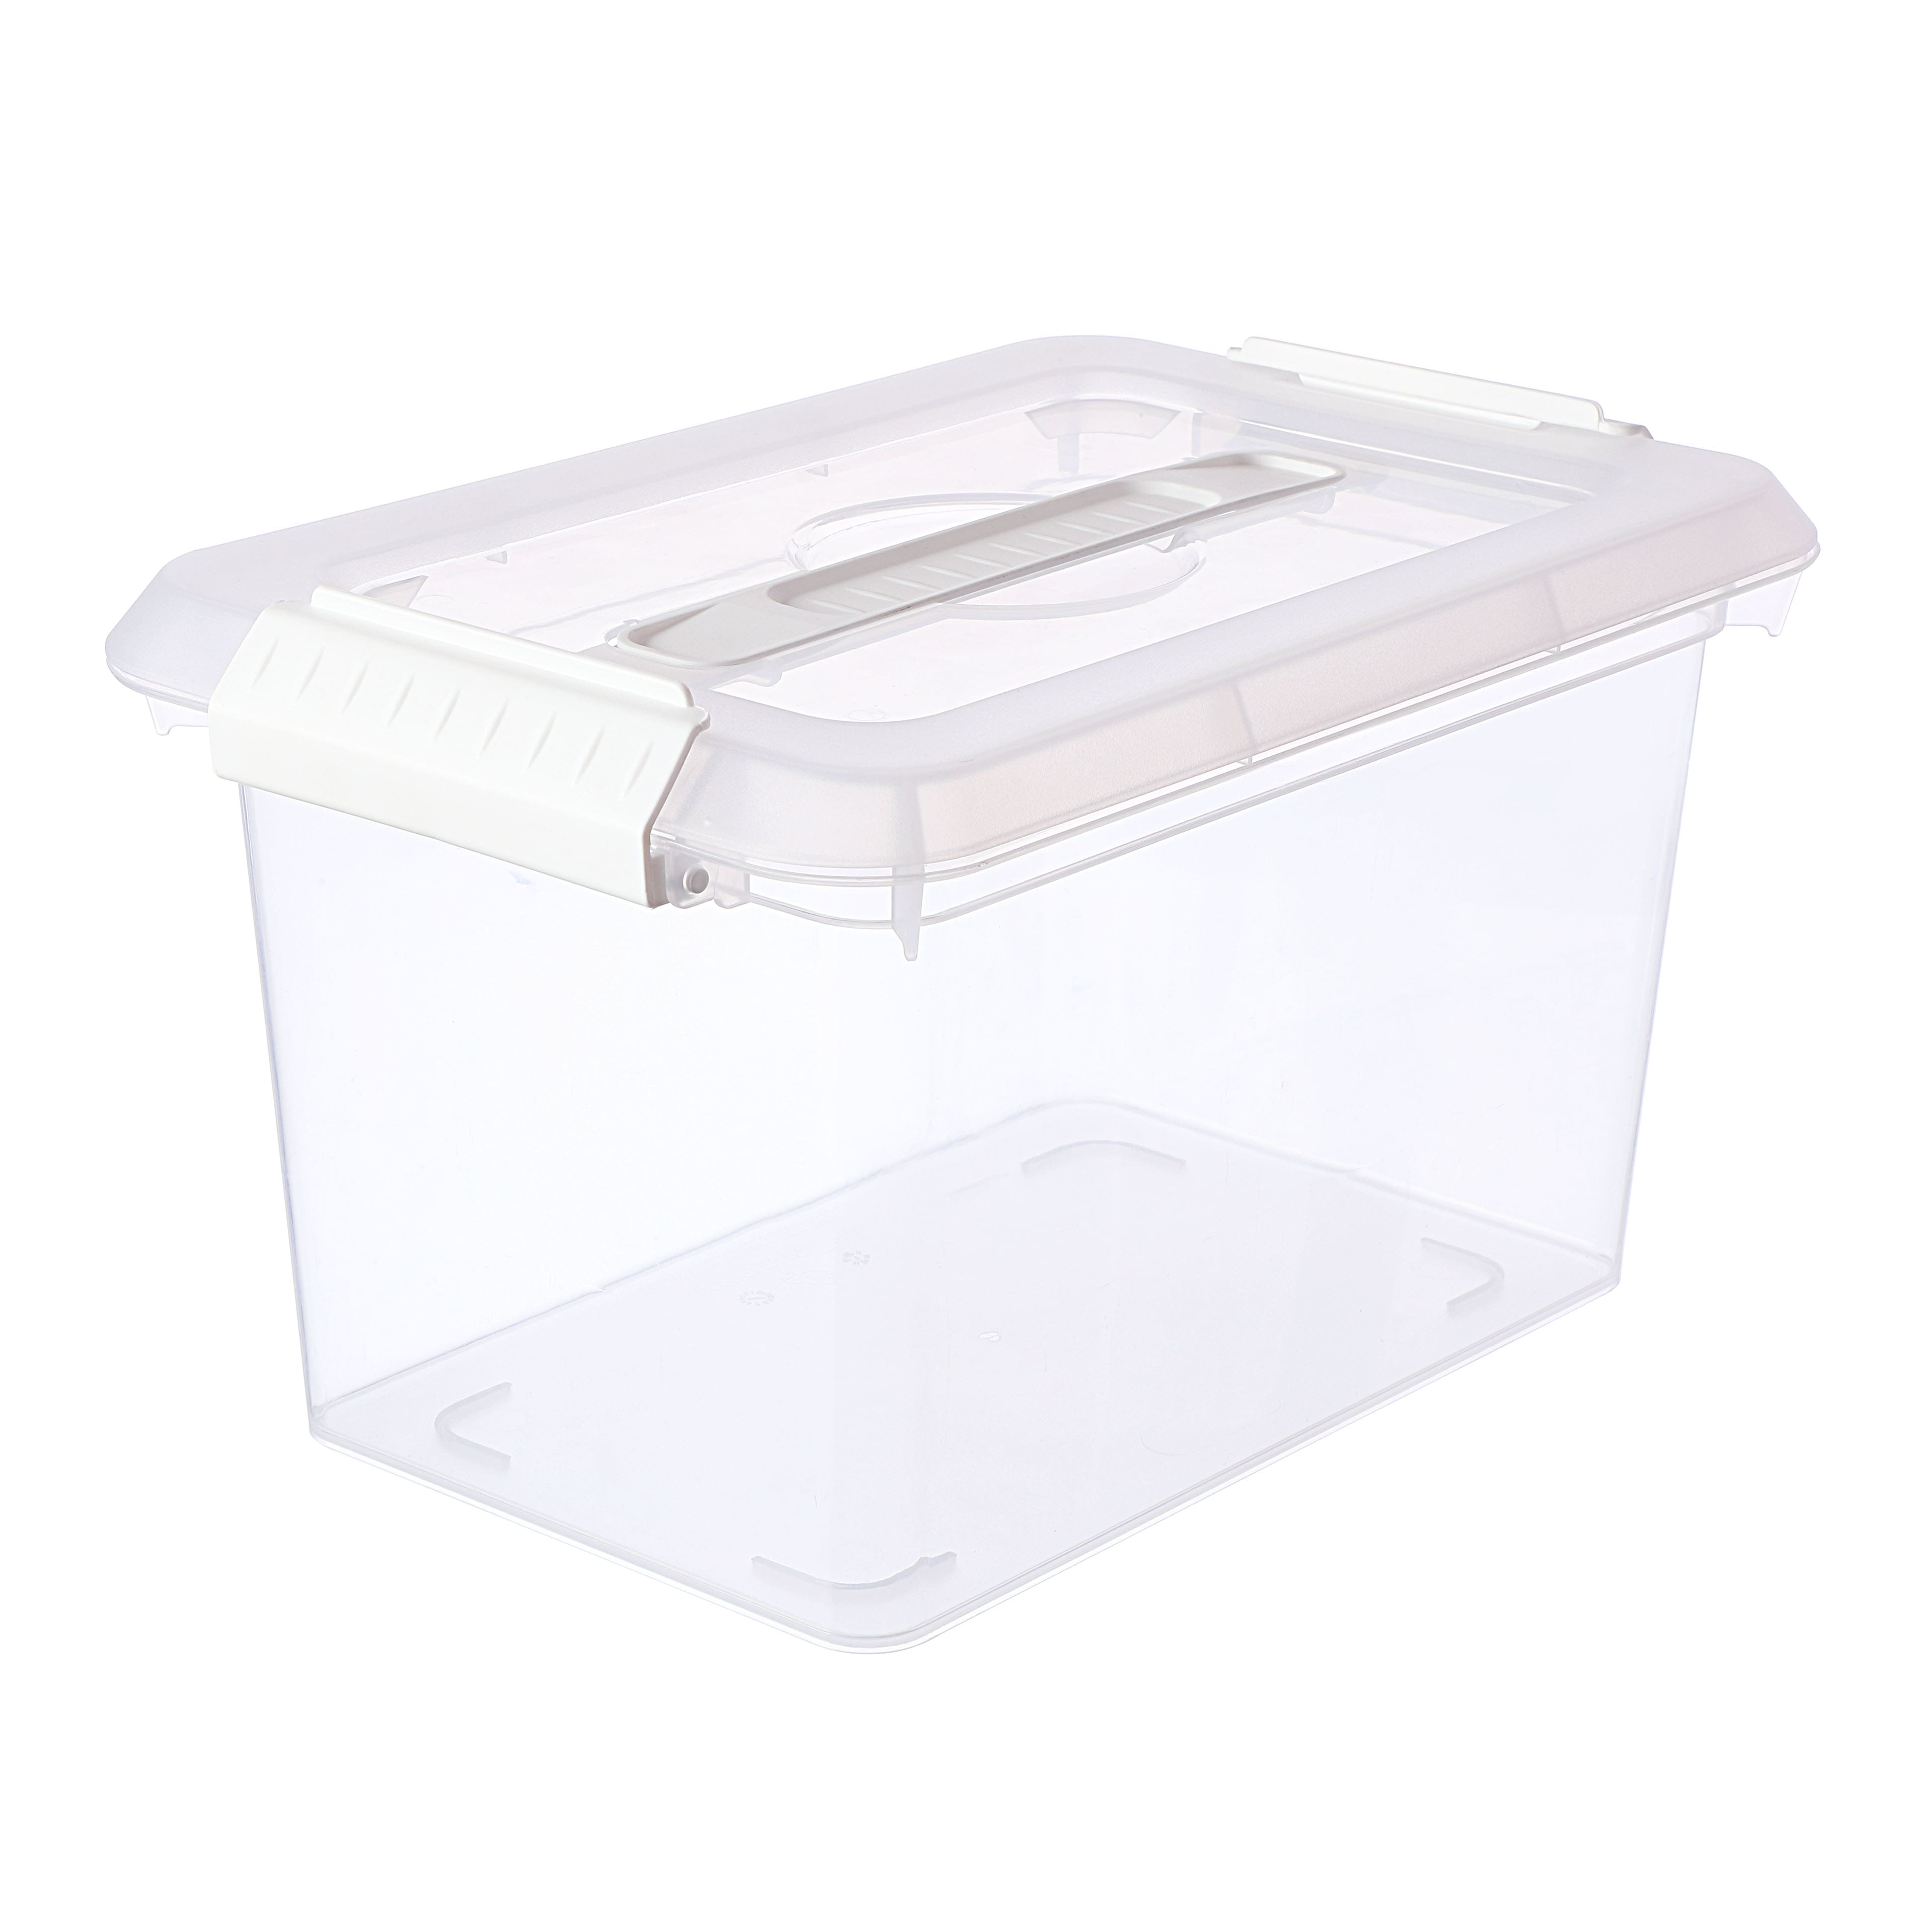 Buy in Bulk - 6 Pack: 6.2qt. Storage Bin with Lid by Simply Tidy